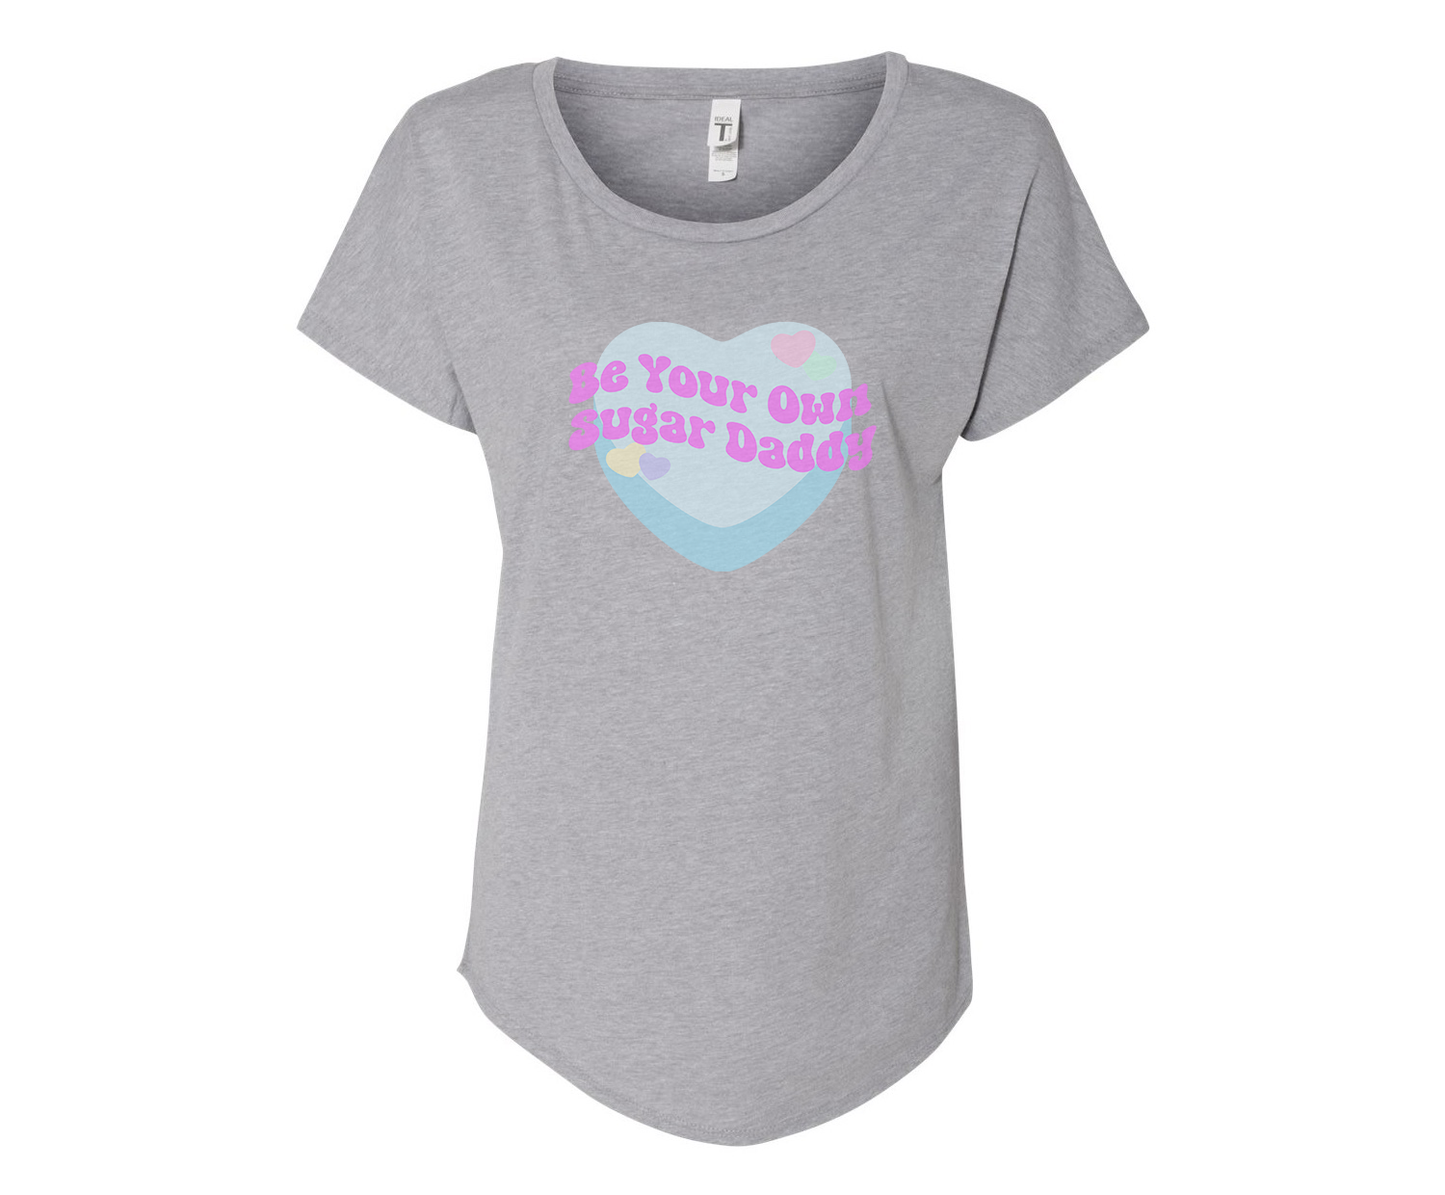 Be Your Own Sugar Daddy Ladies Tee Shirt - In Grey & White